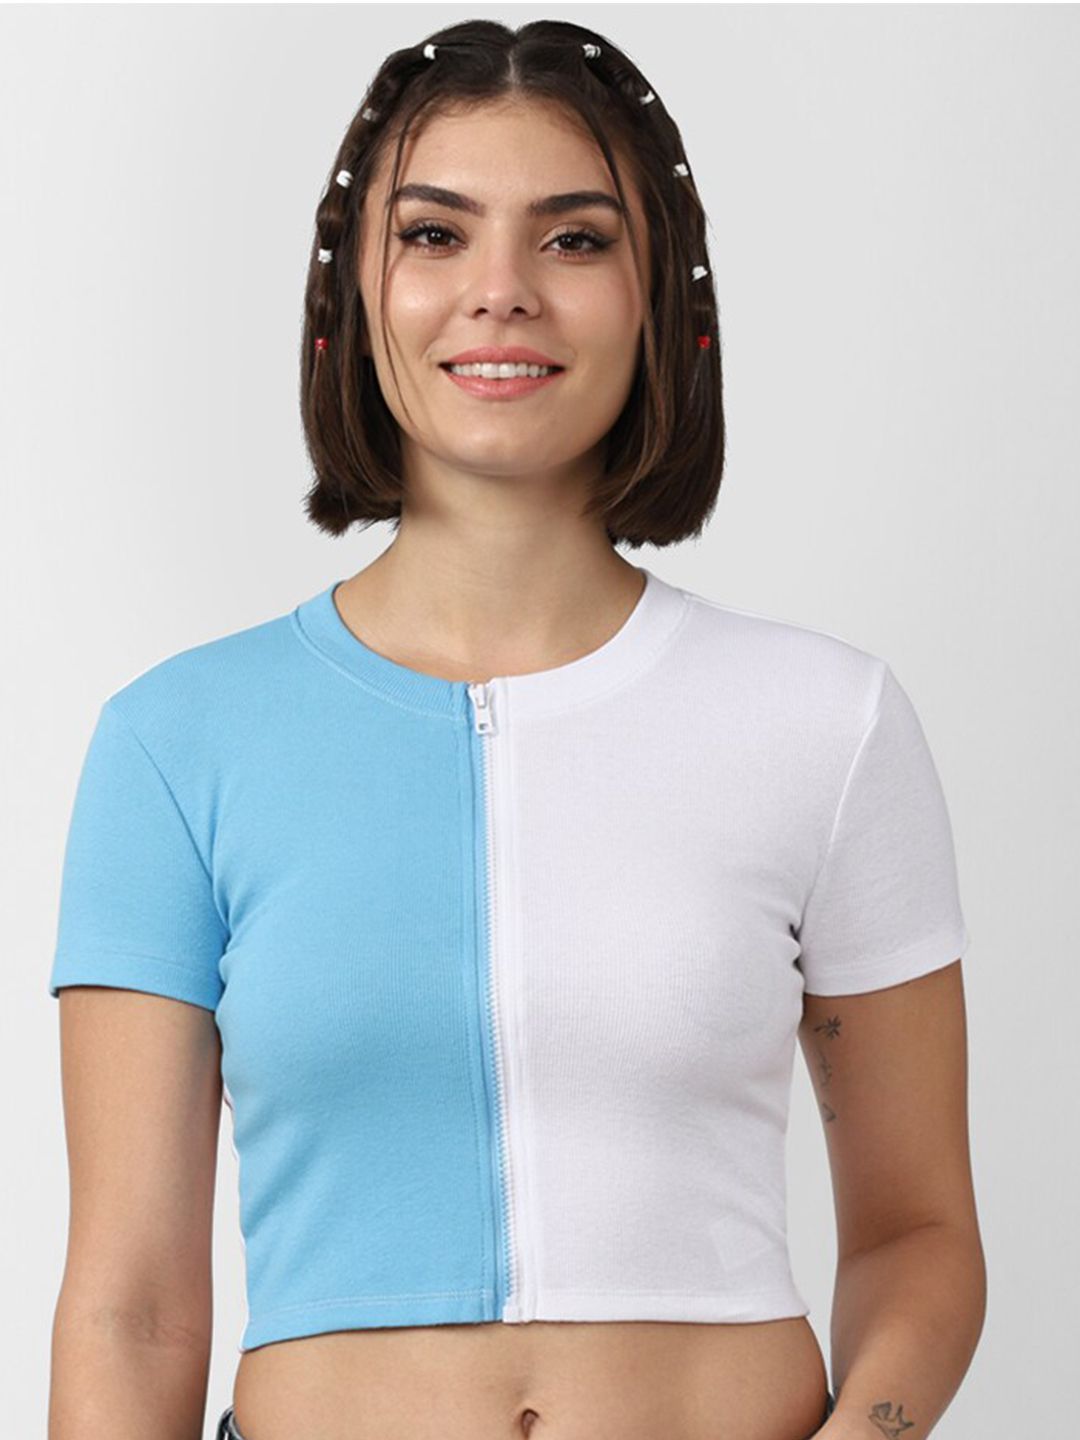 FOREVER 21 Women White & Blue Colourblocked Crop Top Price in India